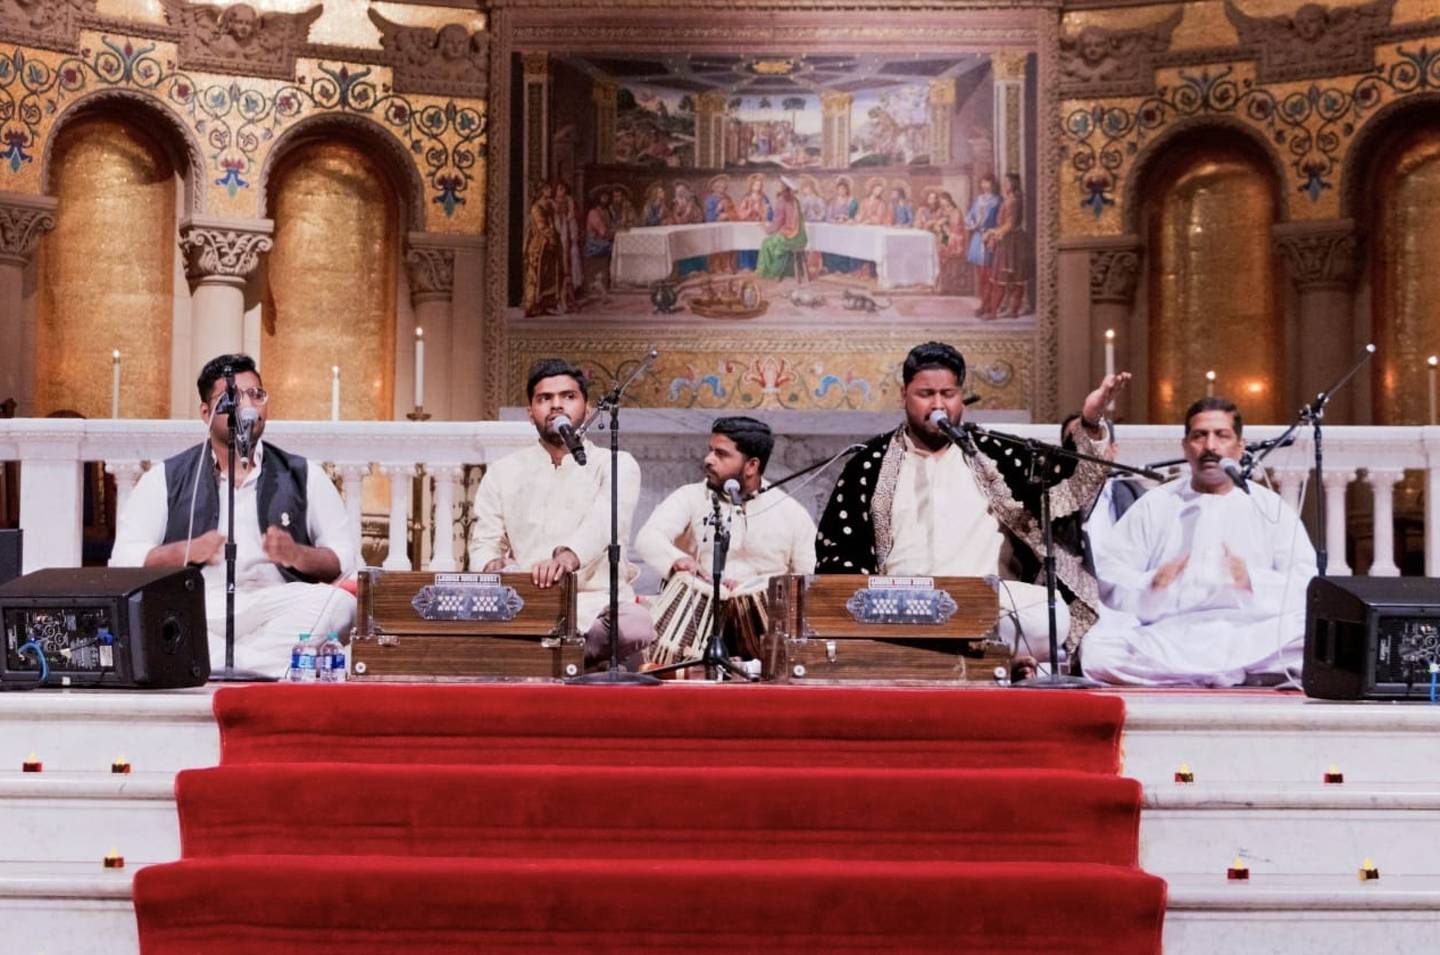 The Embassy of Pakistan will present Qawwali Night, a form of Sufi music, on March 4 and 5. Photo: Spring of Culture